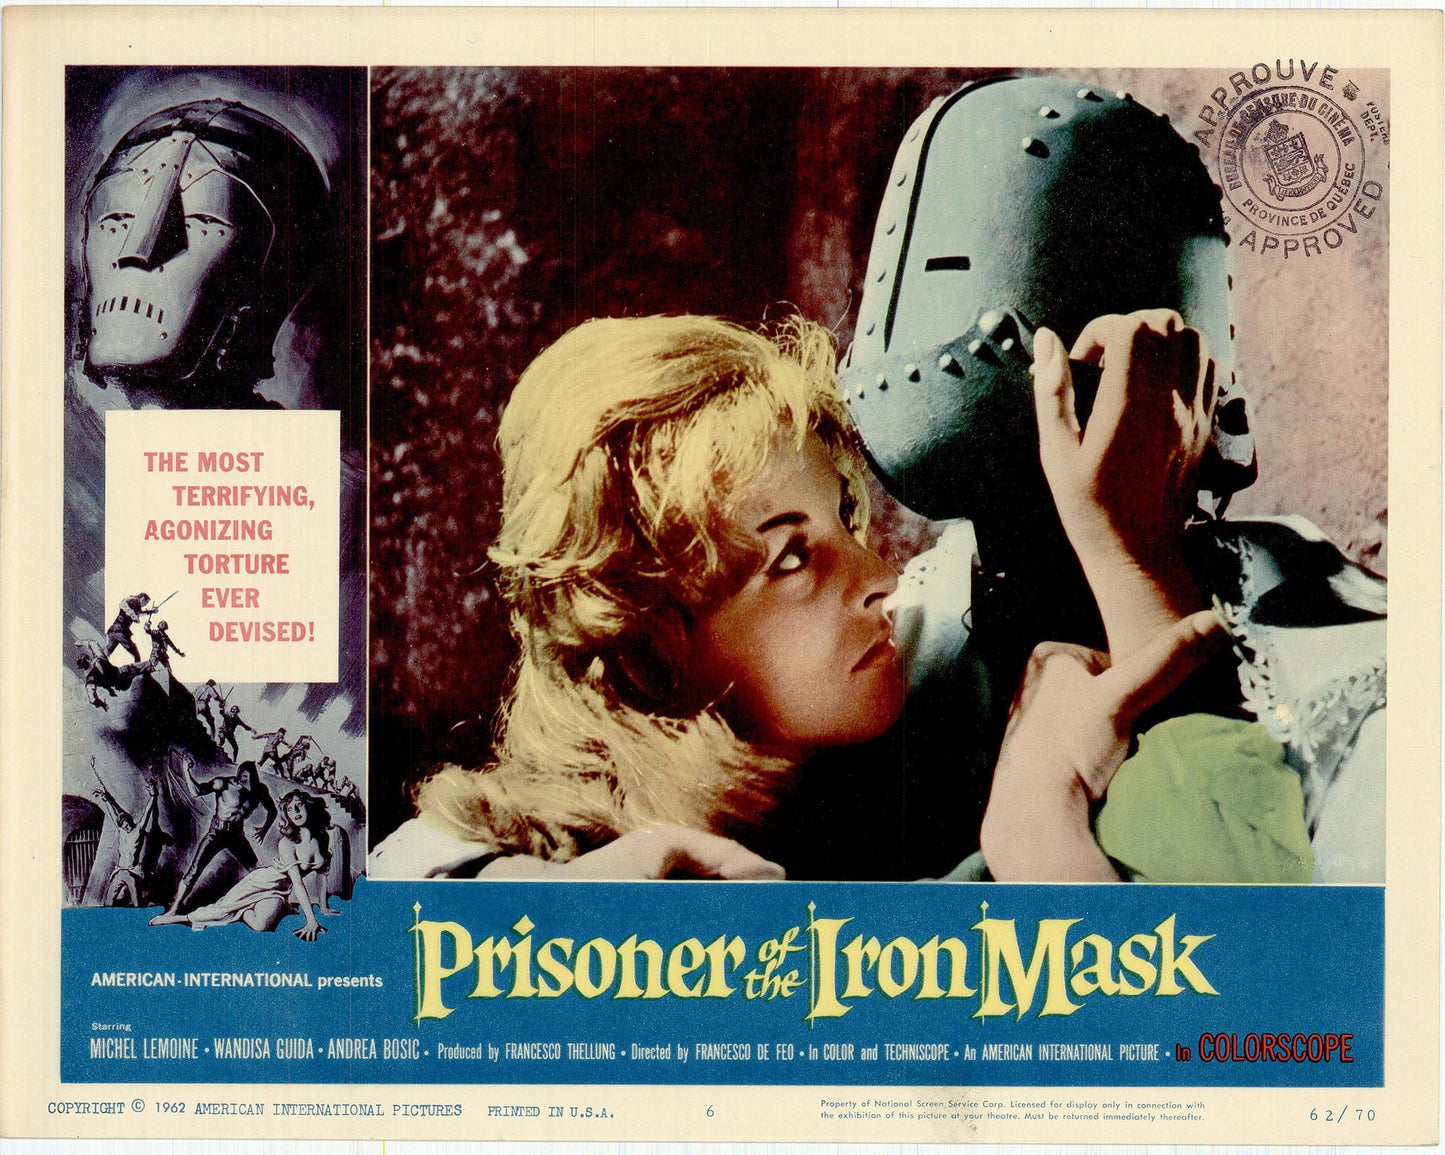 The Prisoner of the Iron Mask Movie Lobby Card